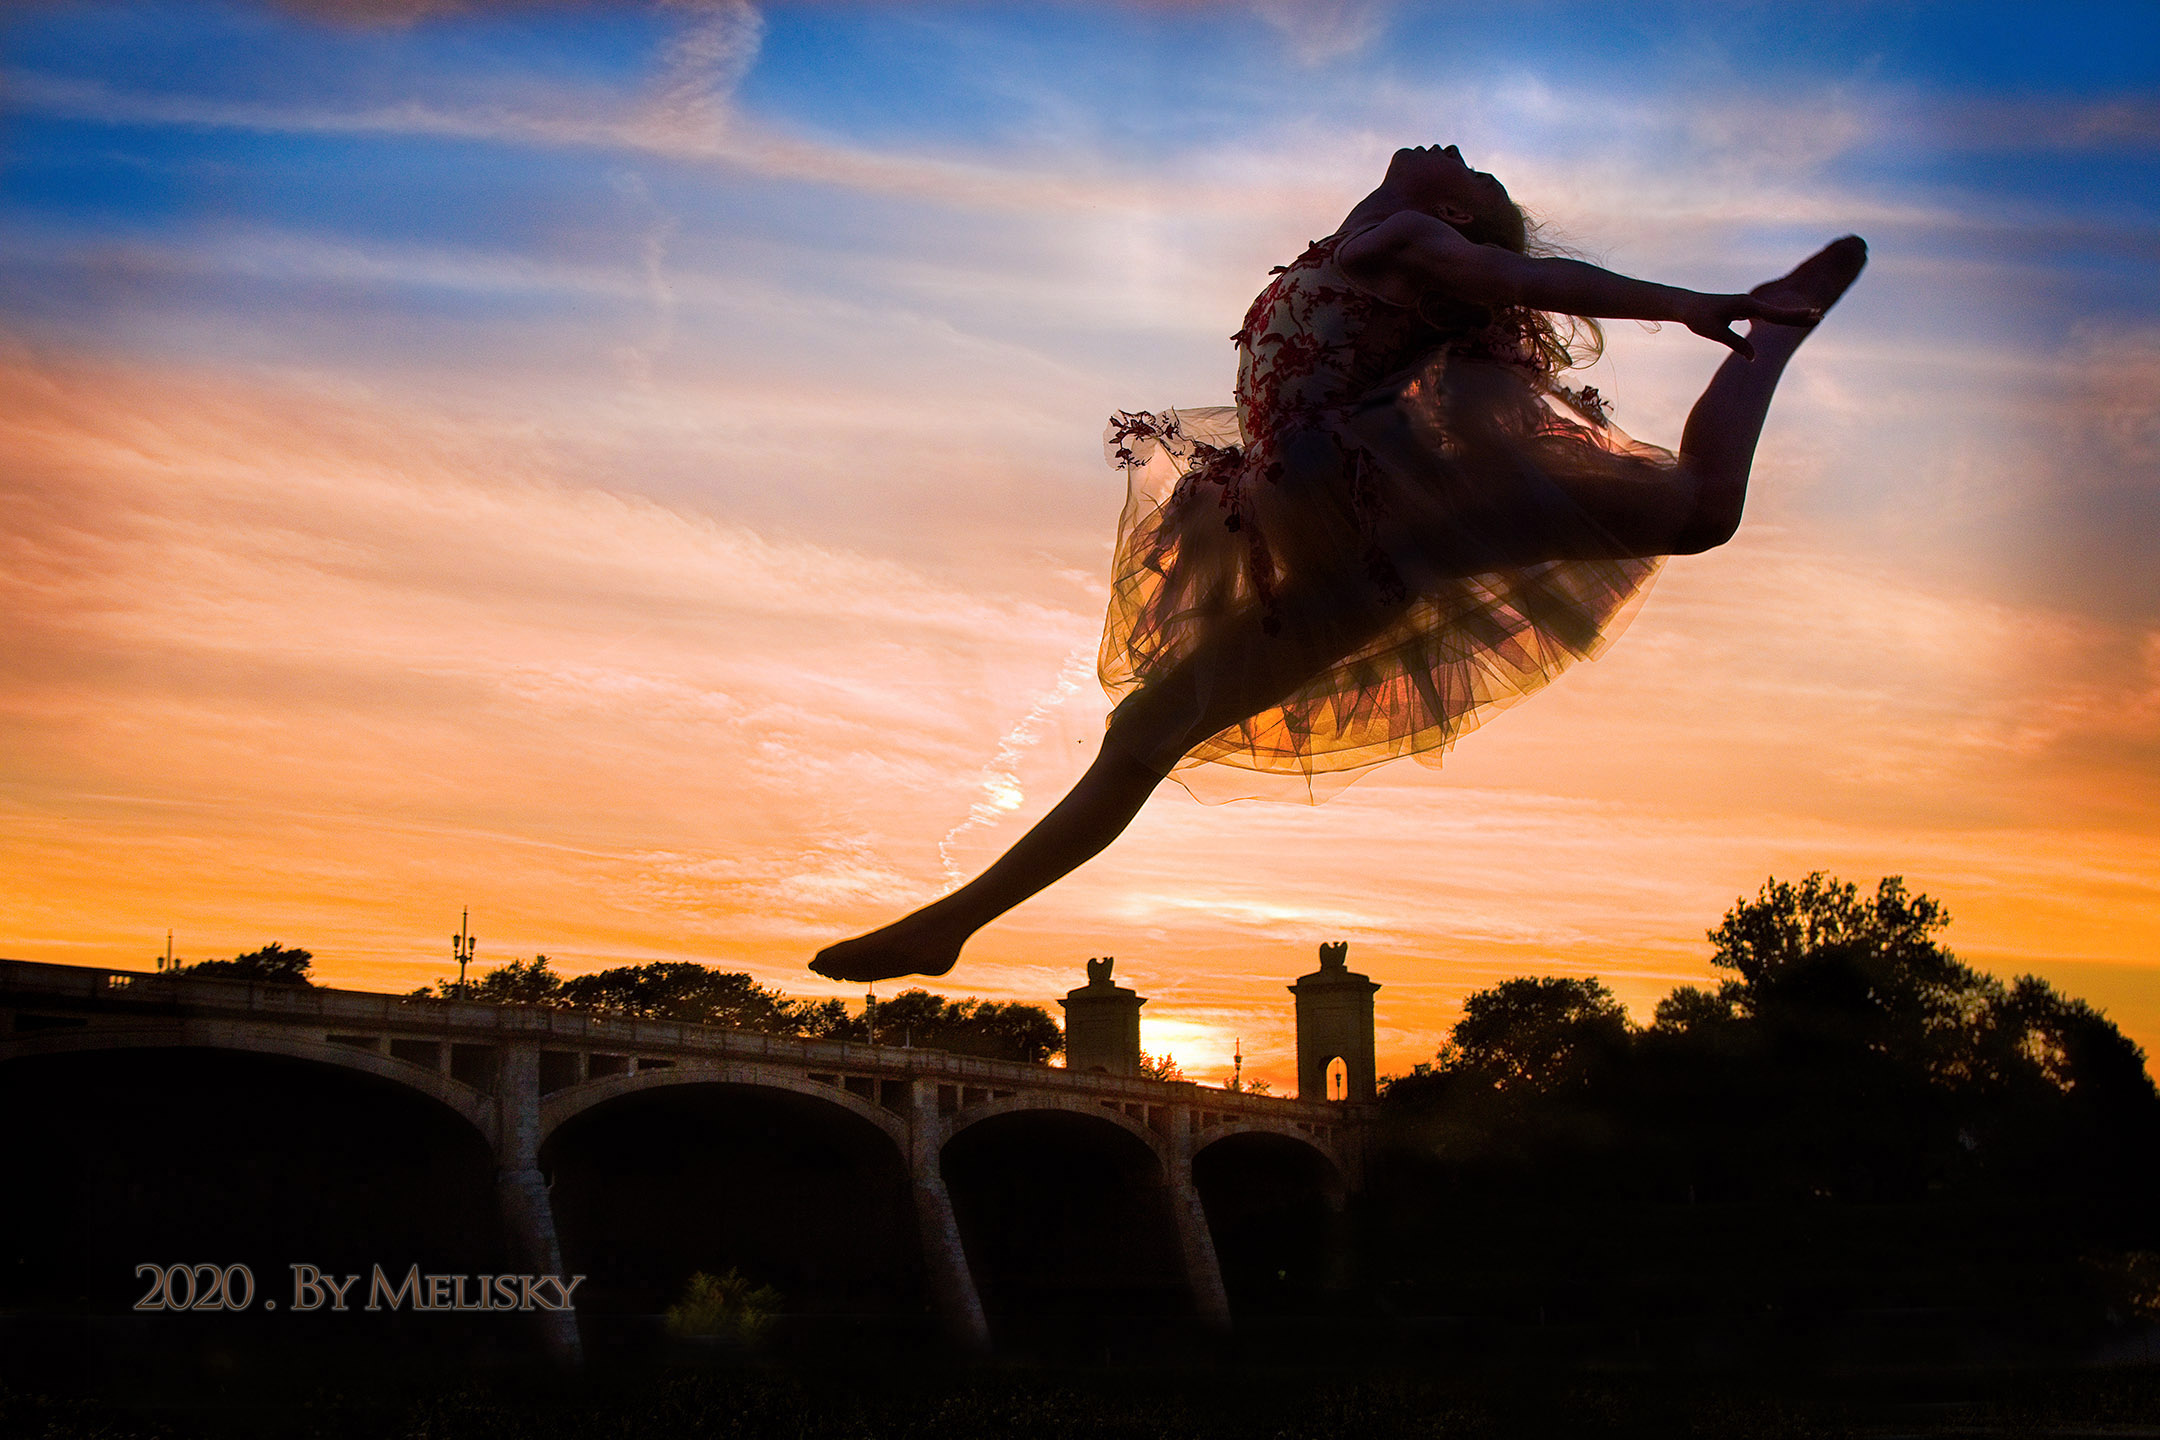 Dancers Leaping Avove the Susquehanna River